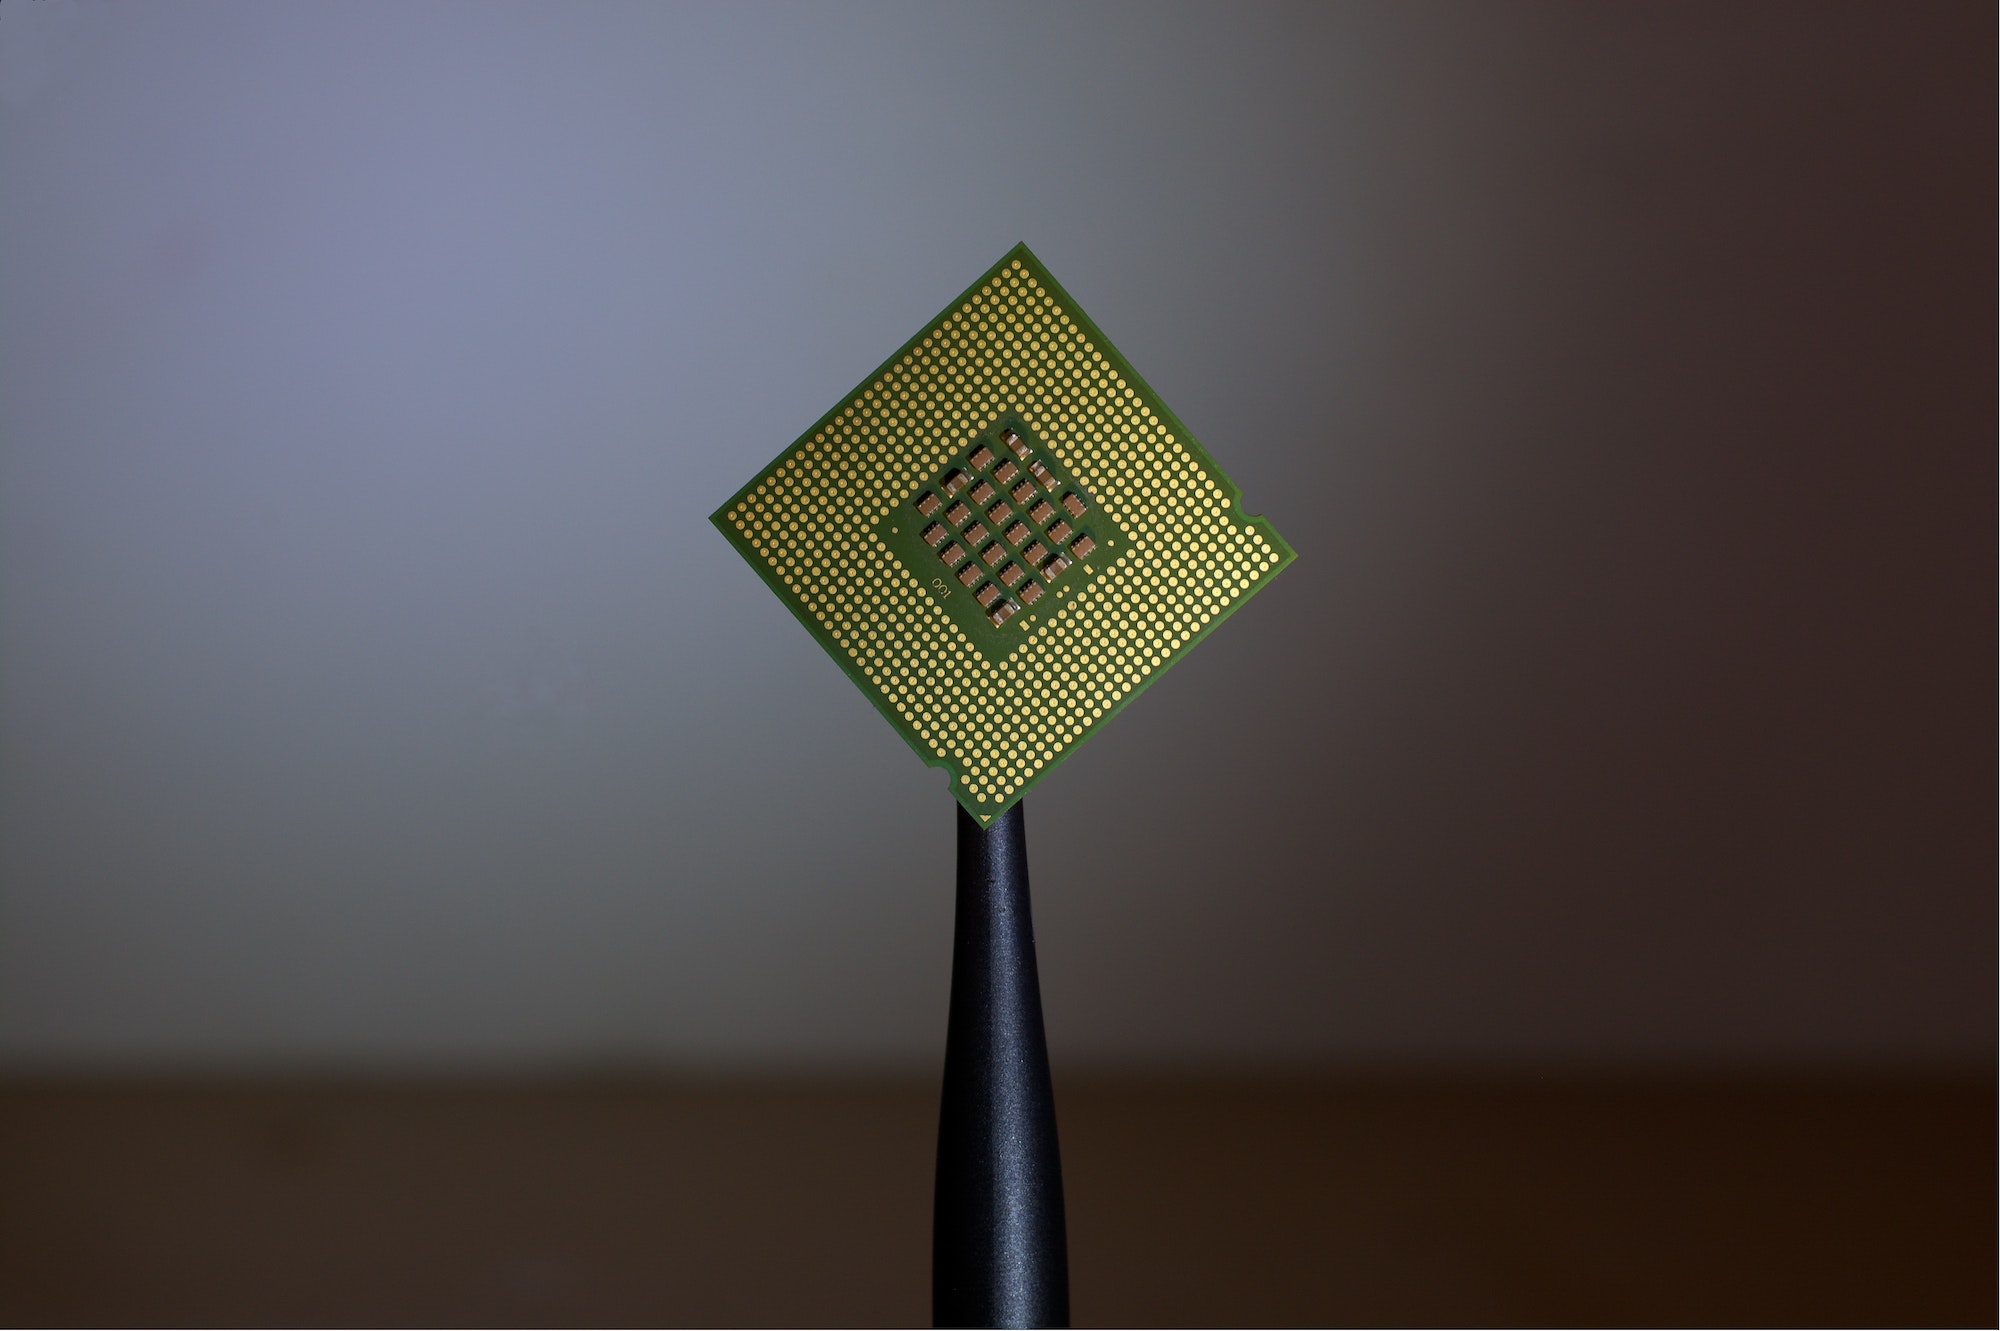 A green and gold computer chip is help up in the air by a black stick